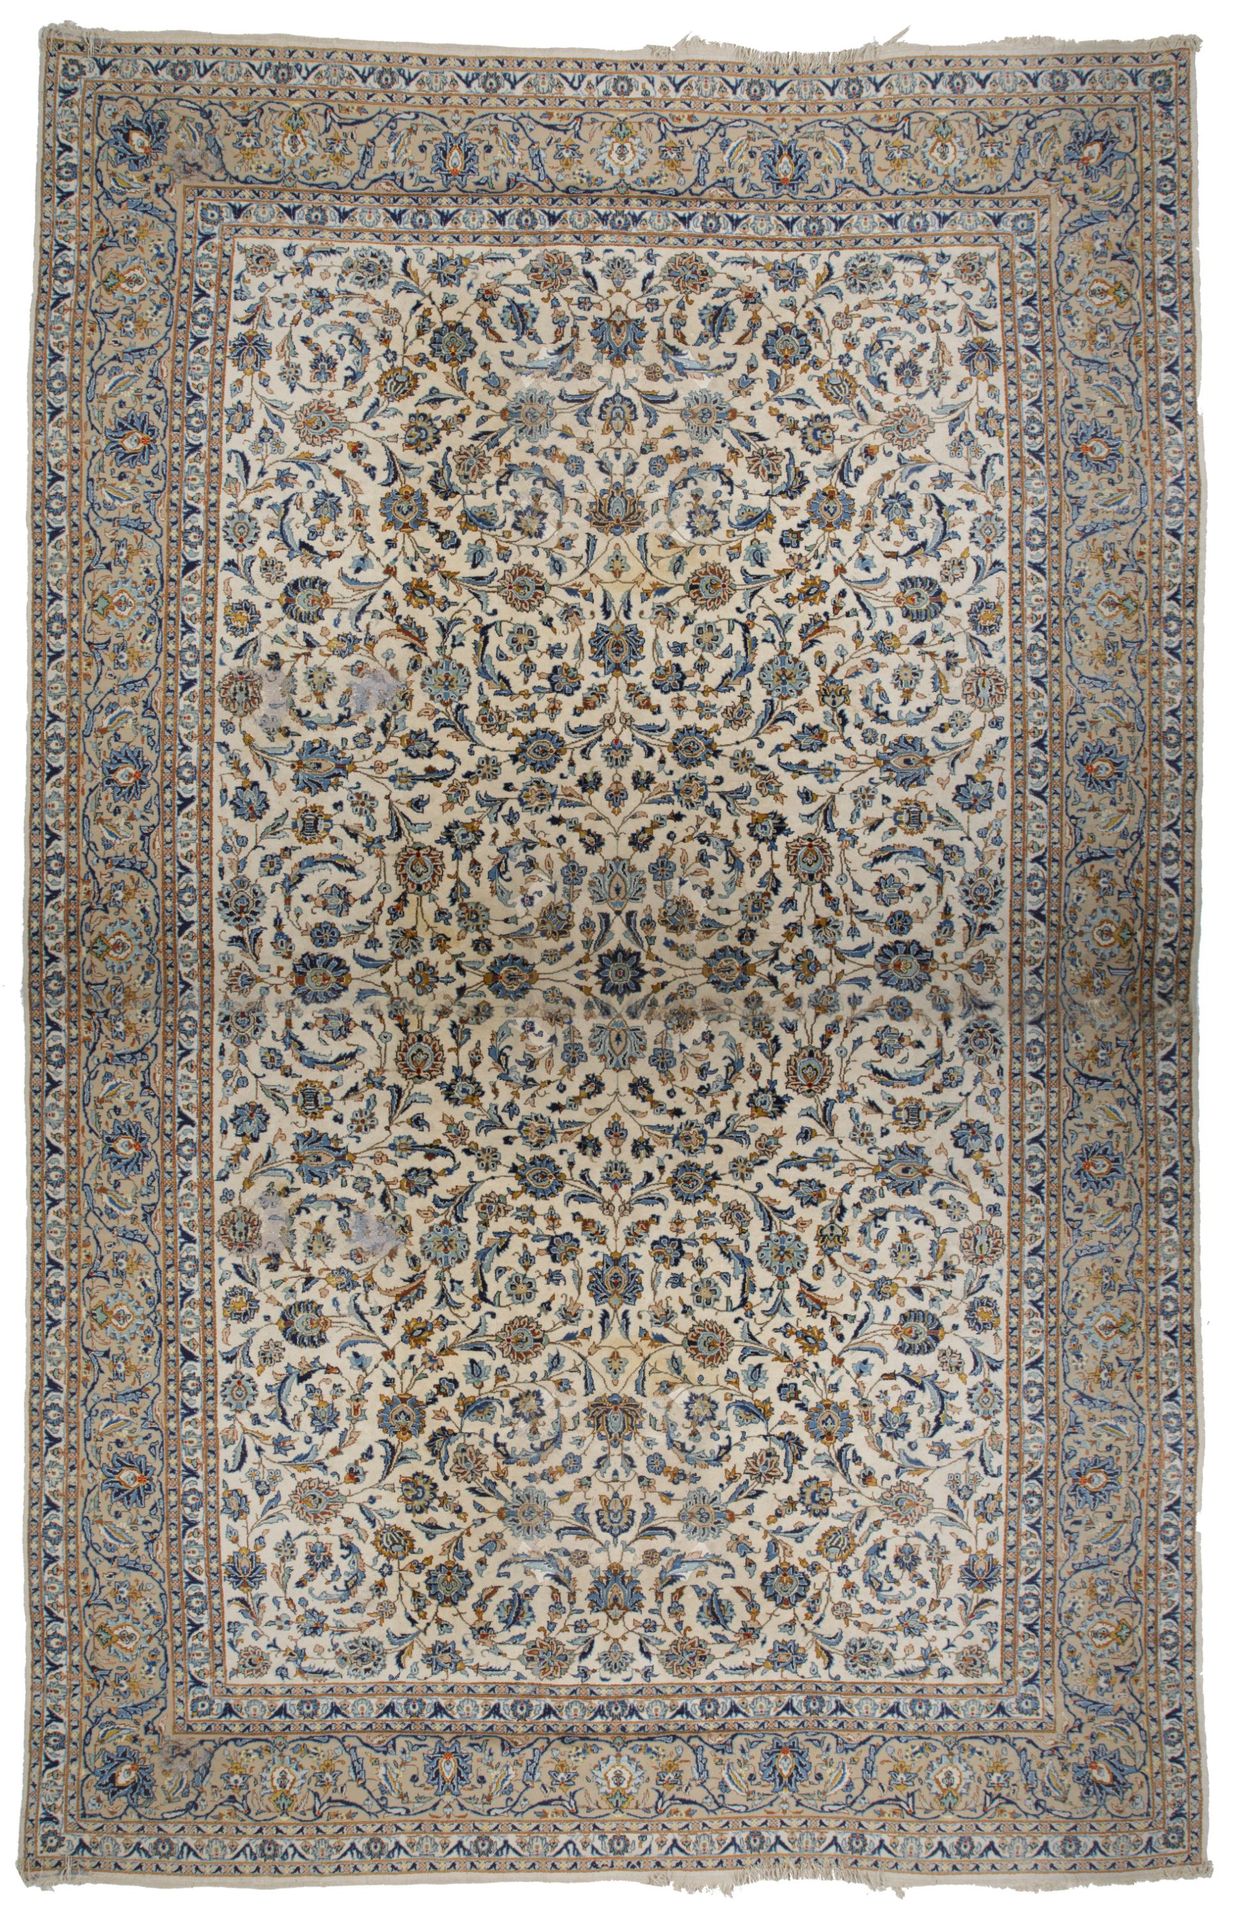 Persian hand-knotted wool rug, Kashan, mid 20th century. Champ brut et décor flo&hellip;